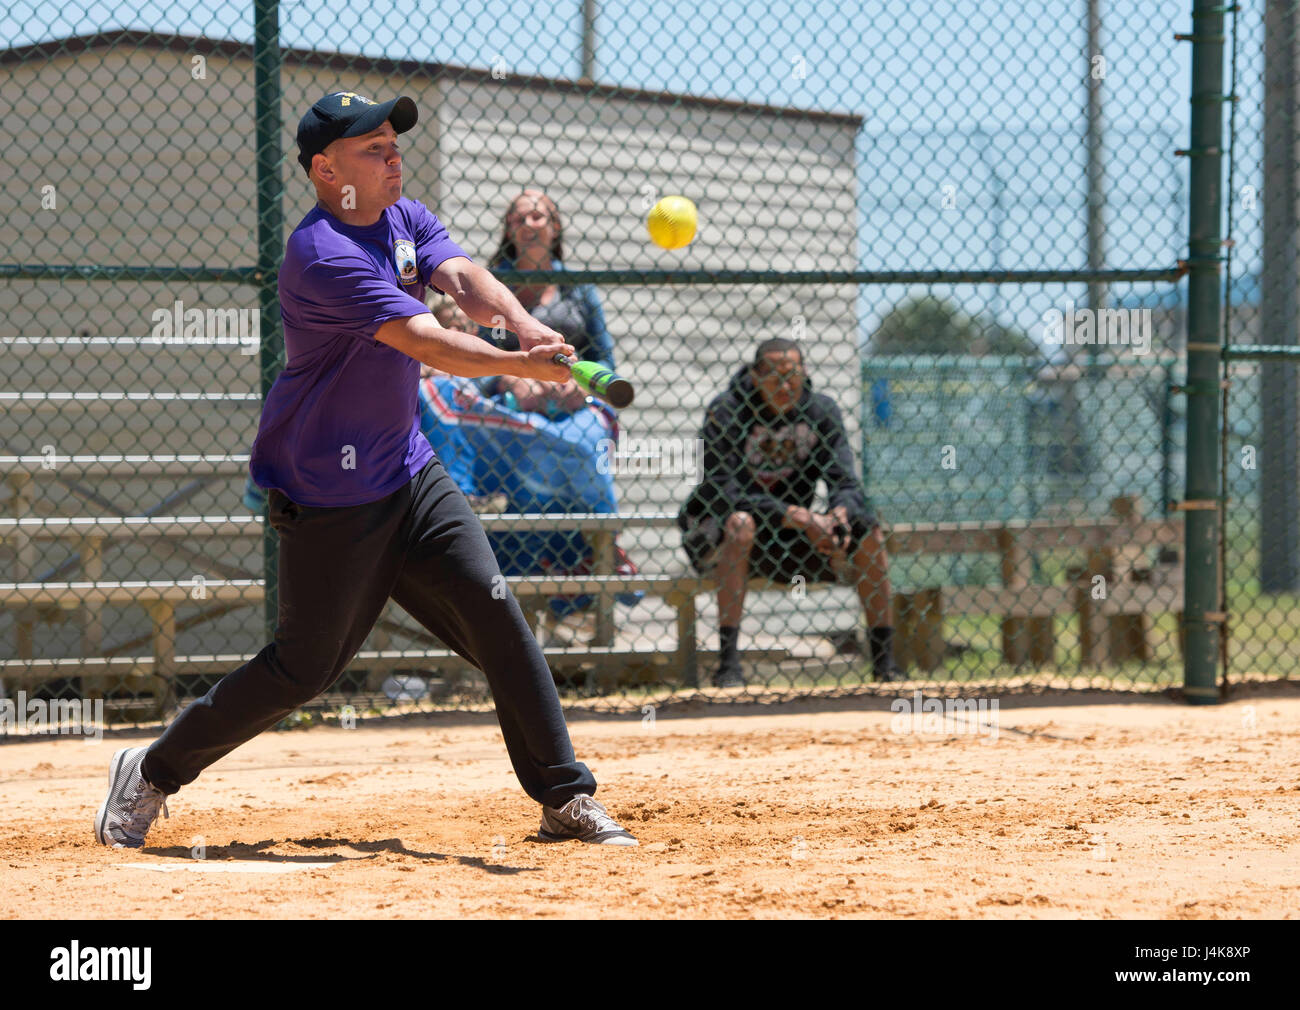 MAYPORT, Fla. (May 5, 2017) – Logistics Specialist 2nd Class Kevin Ortega swings at a pitch during a softball game between the amphibious assault ship USS Iwo Jima’s (LHD 7) Wardroom and Second Class Petty Officer Association (SCPOA).  The game was held as part of a tournament between the ship’s Wardroom, First Class Petty Officer Association, Chief Petty Officer Association & SCPOA to build camaraderie and morale among the ship’s crew. (U.S. Navy photo by Mass Communication Specialist 2nd Class Hunter S. Harwell/Released) Stock Photo